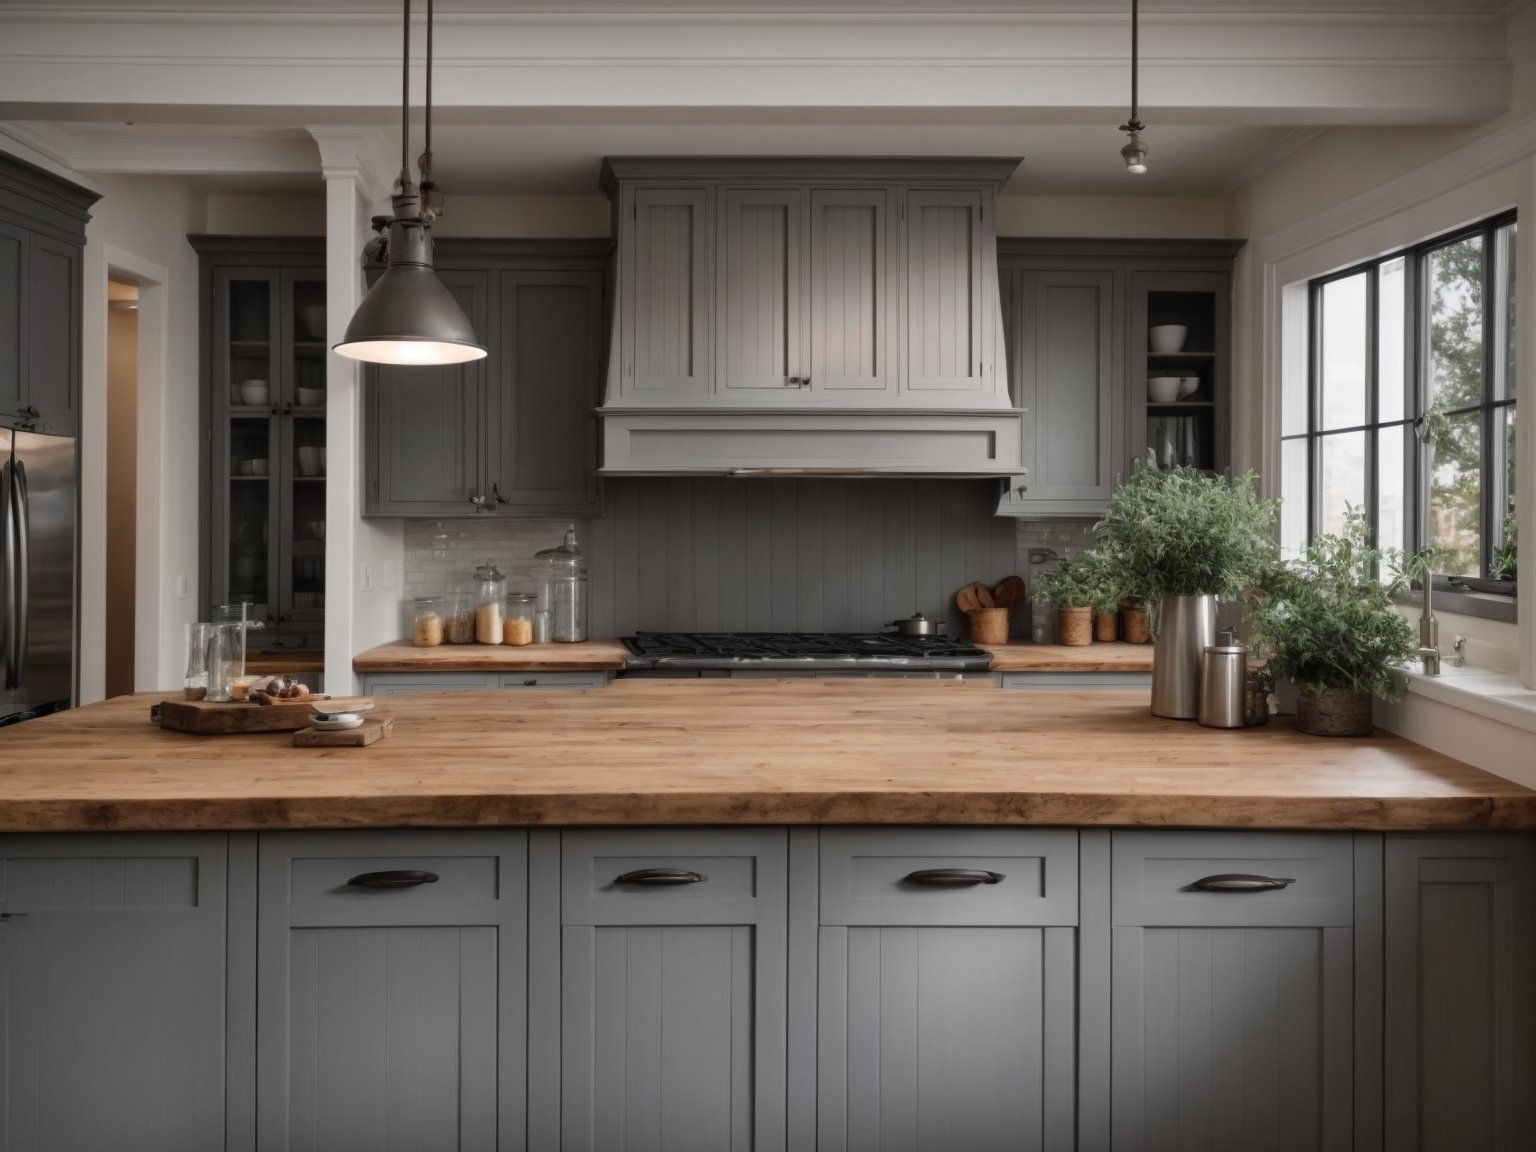 A photo of farmhouse grey kitchen cabinets with butcher block countertops, creating a rustic and cozy feel in the kitchen.